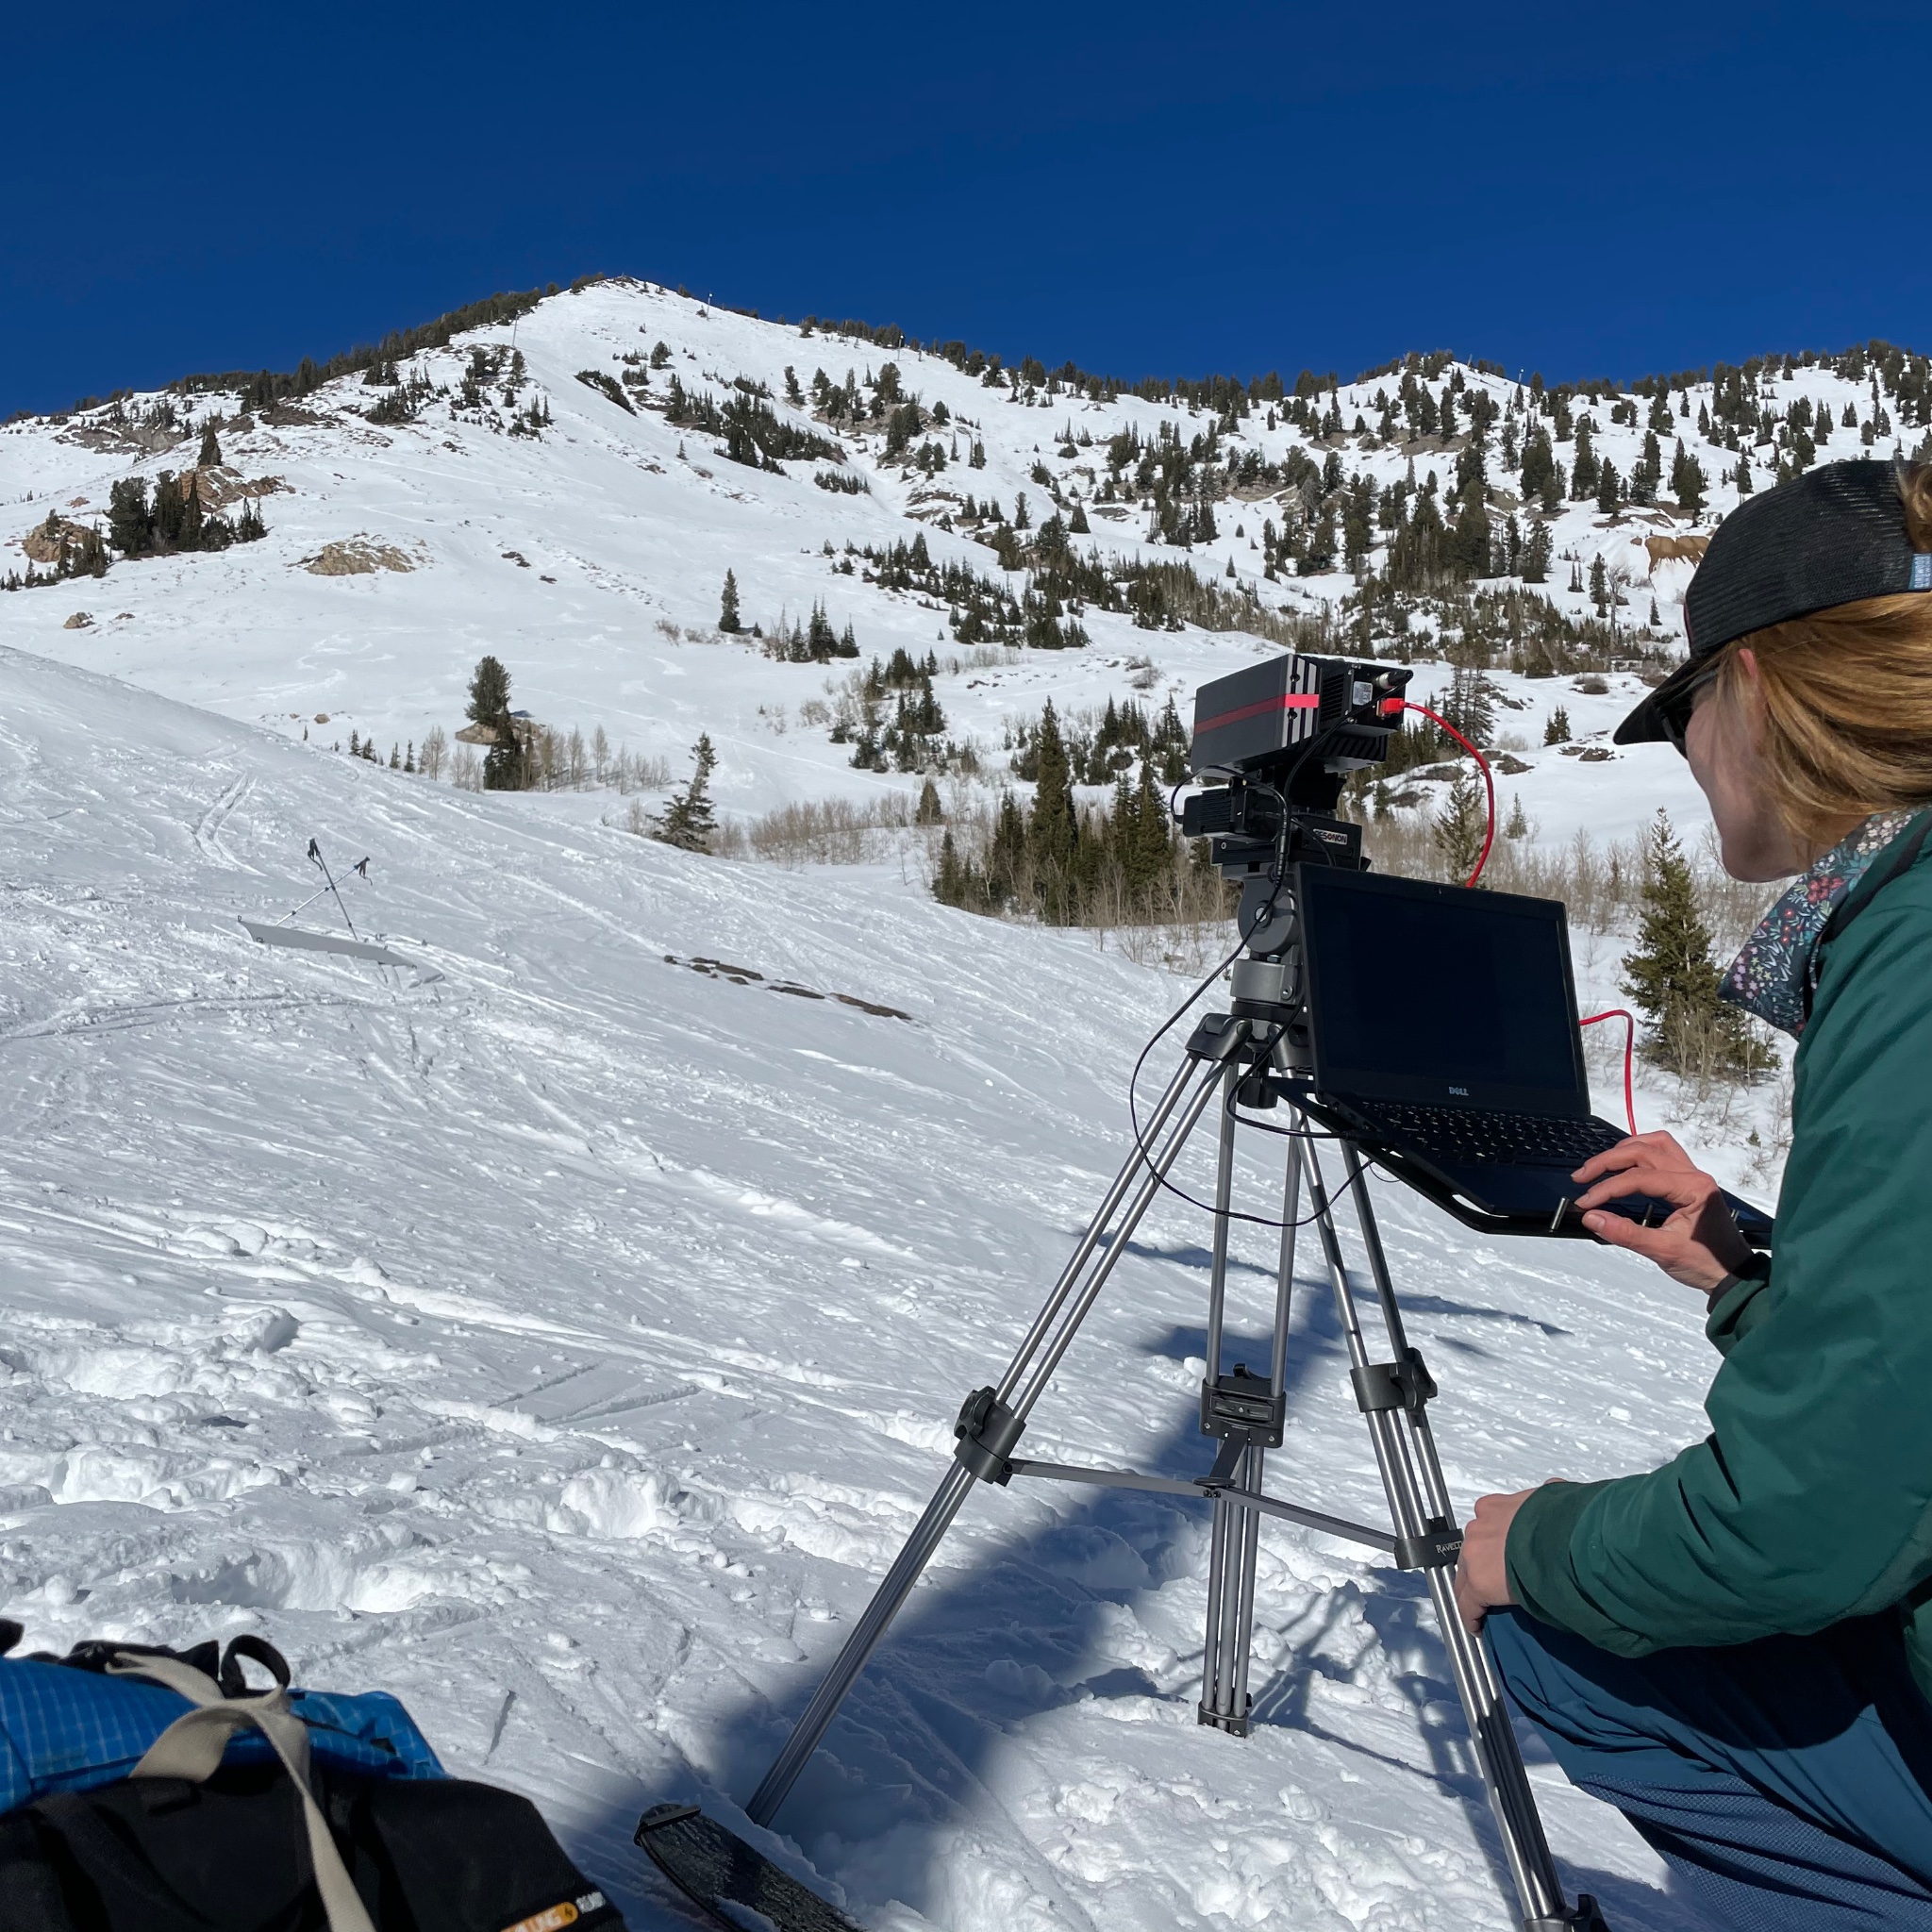 Snow scientist using a tripod-mounted instrument to study snowy landscape